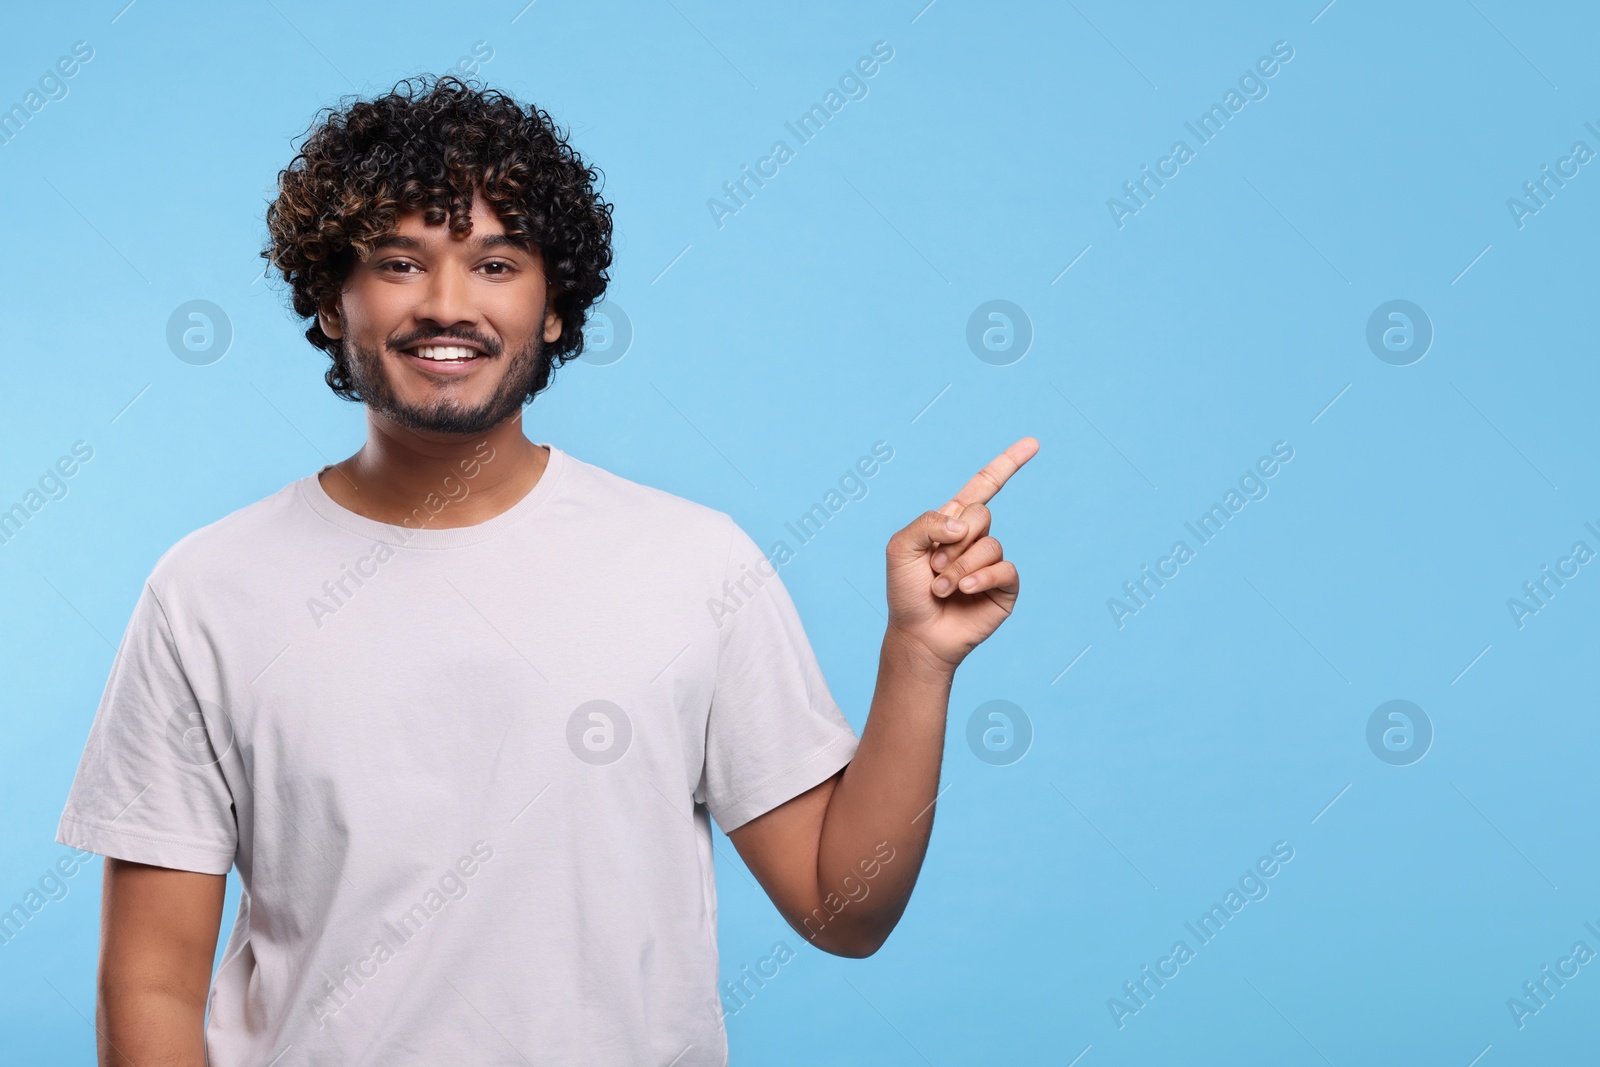 Photo of Handsome smiling man on light blue background, space for text